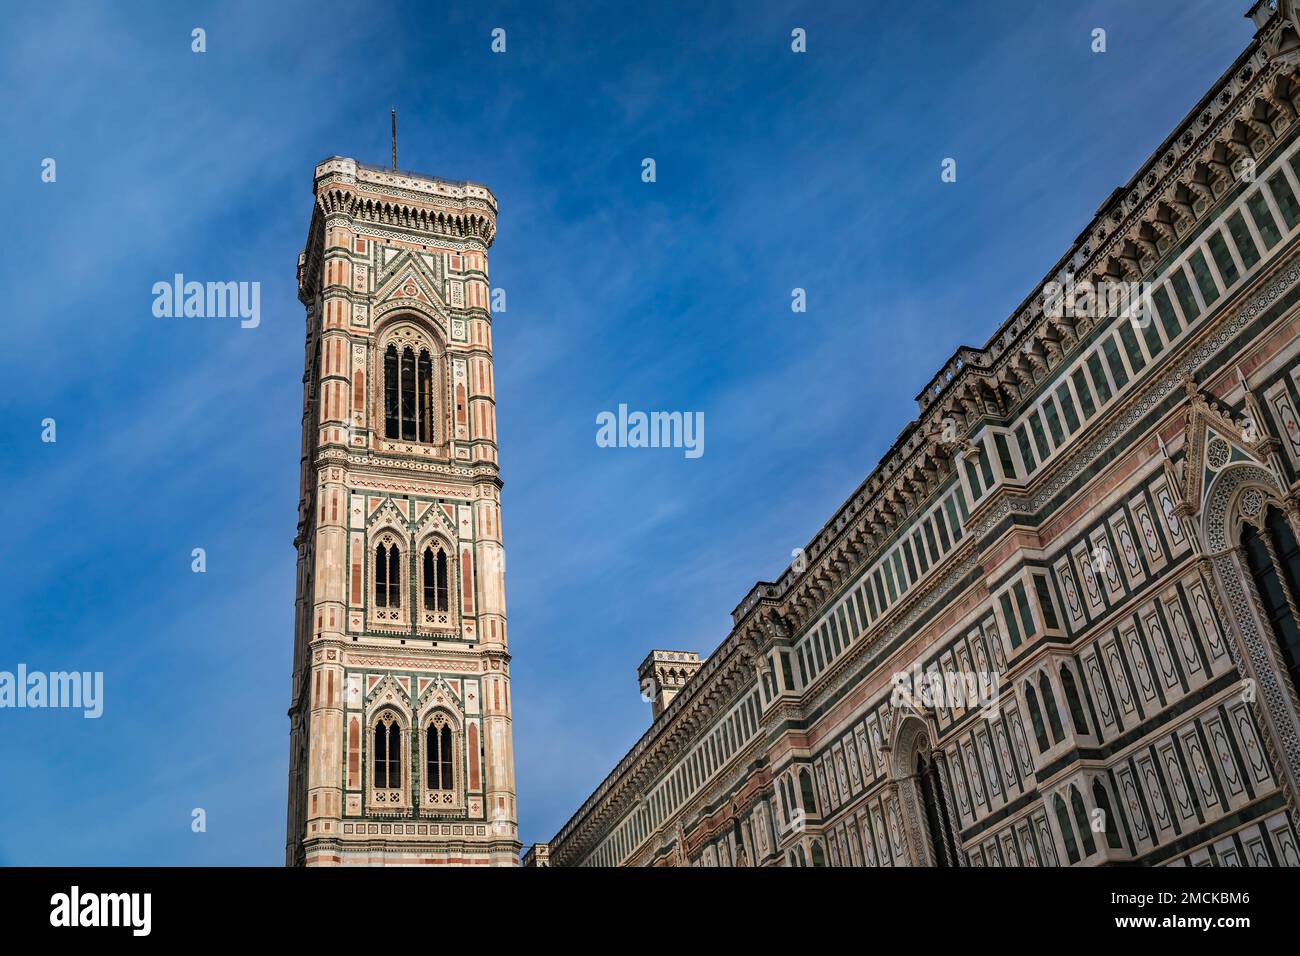 Colored marble facade of the Giotto Campanile bell tower and the Duomo Cathedral or Cattedrale di Santa Maria del Fiore complex in Florence, Italy Stock Photo